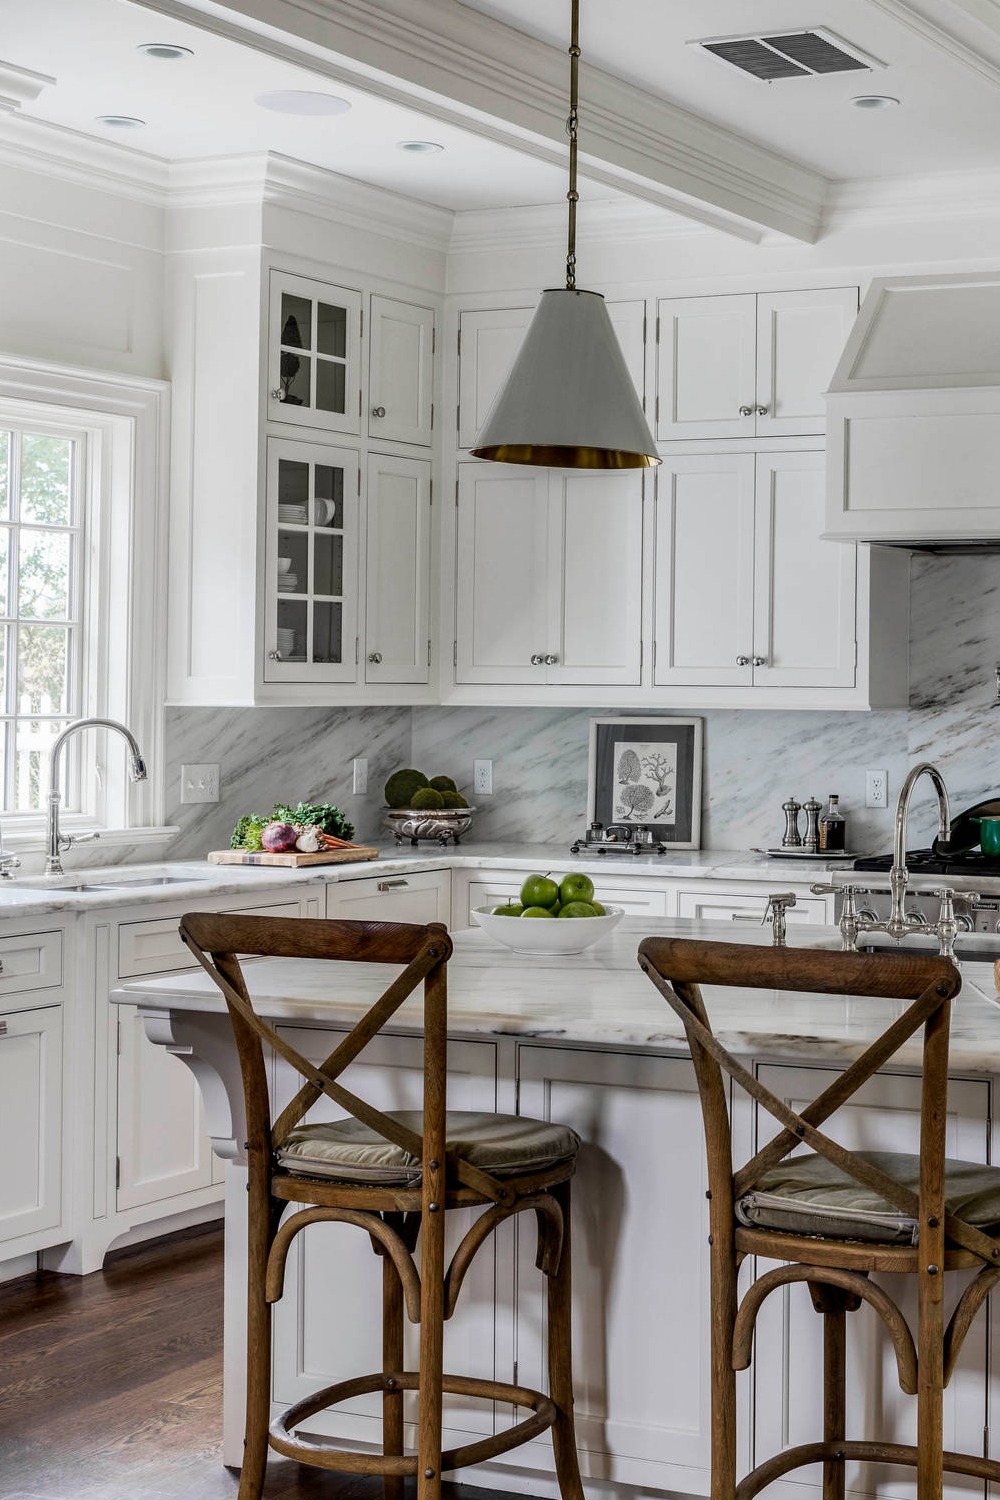 White Wall Cabinets Raised Panel Doors Off White Kitchen Cabinets Budget Cabinet Range Matter